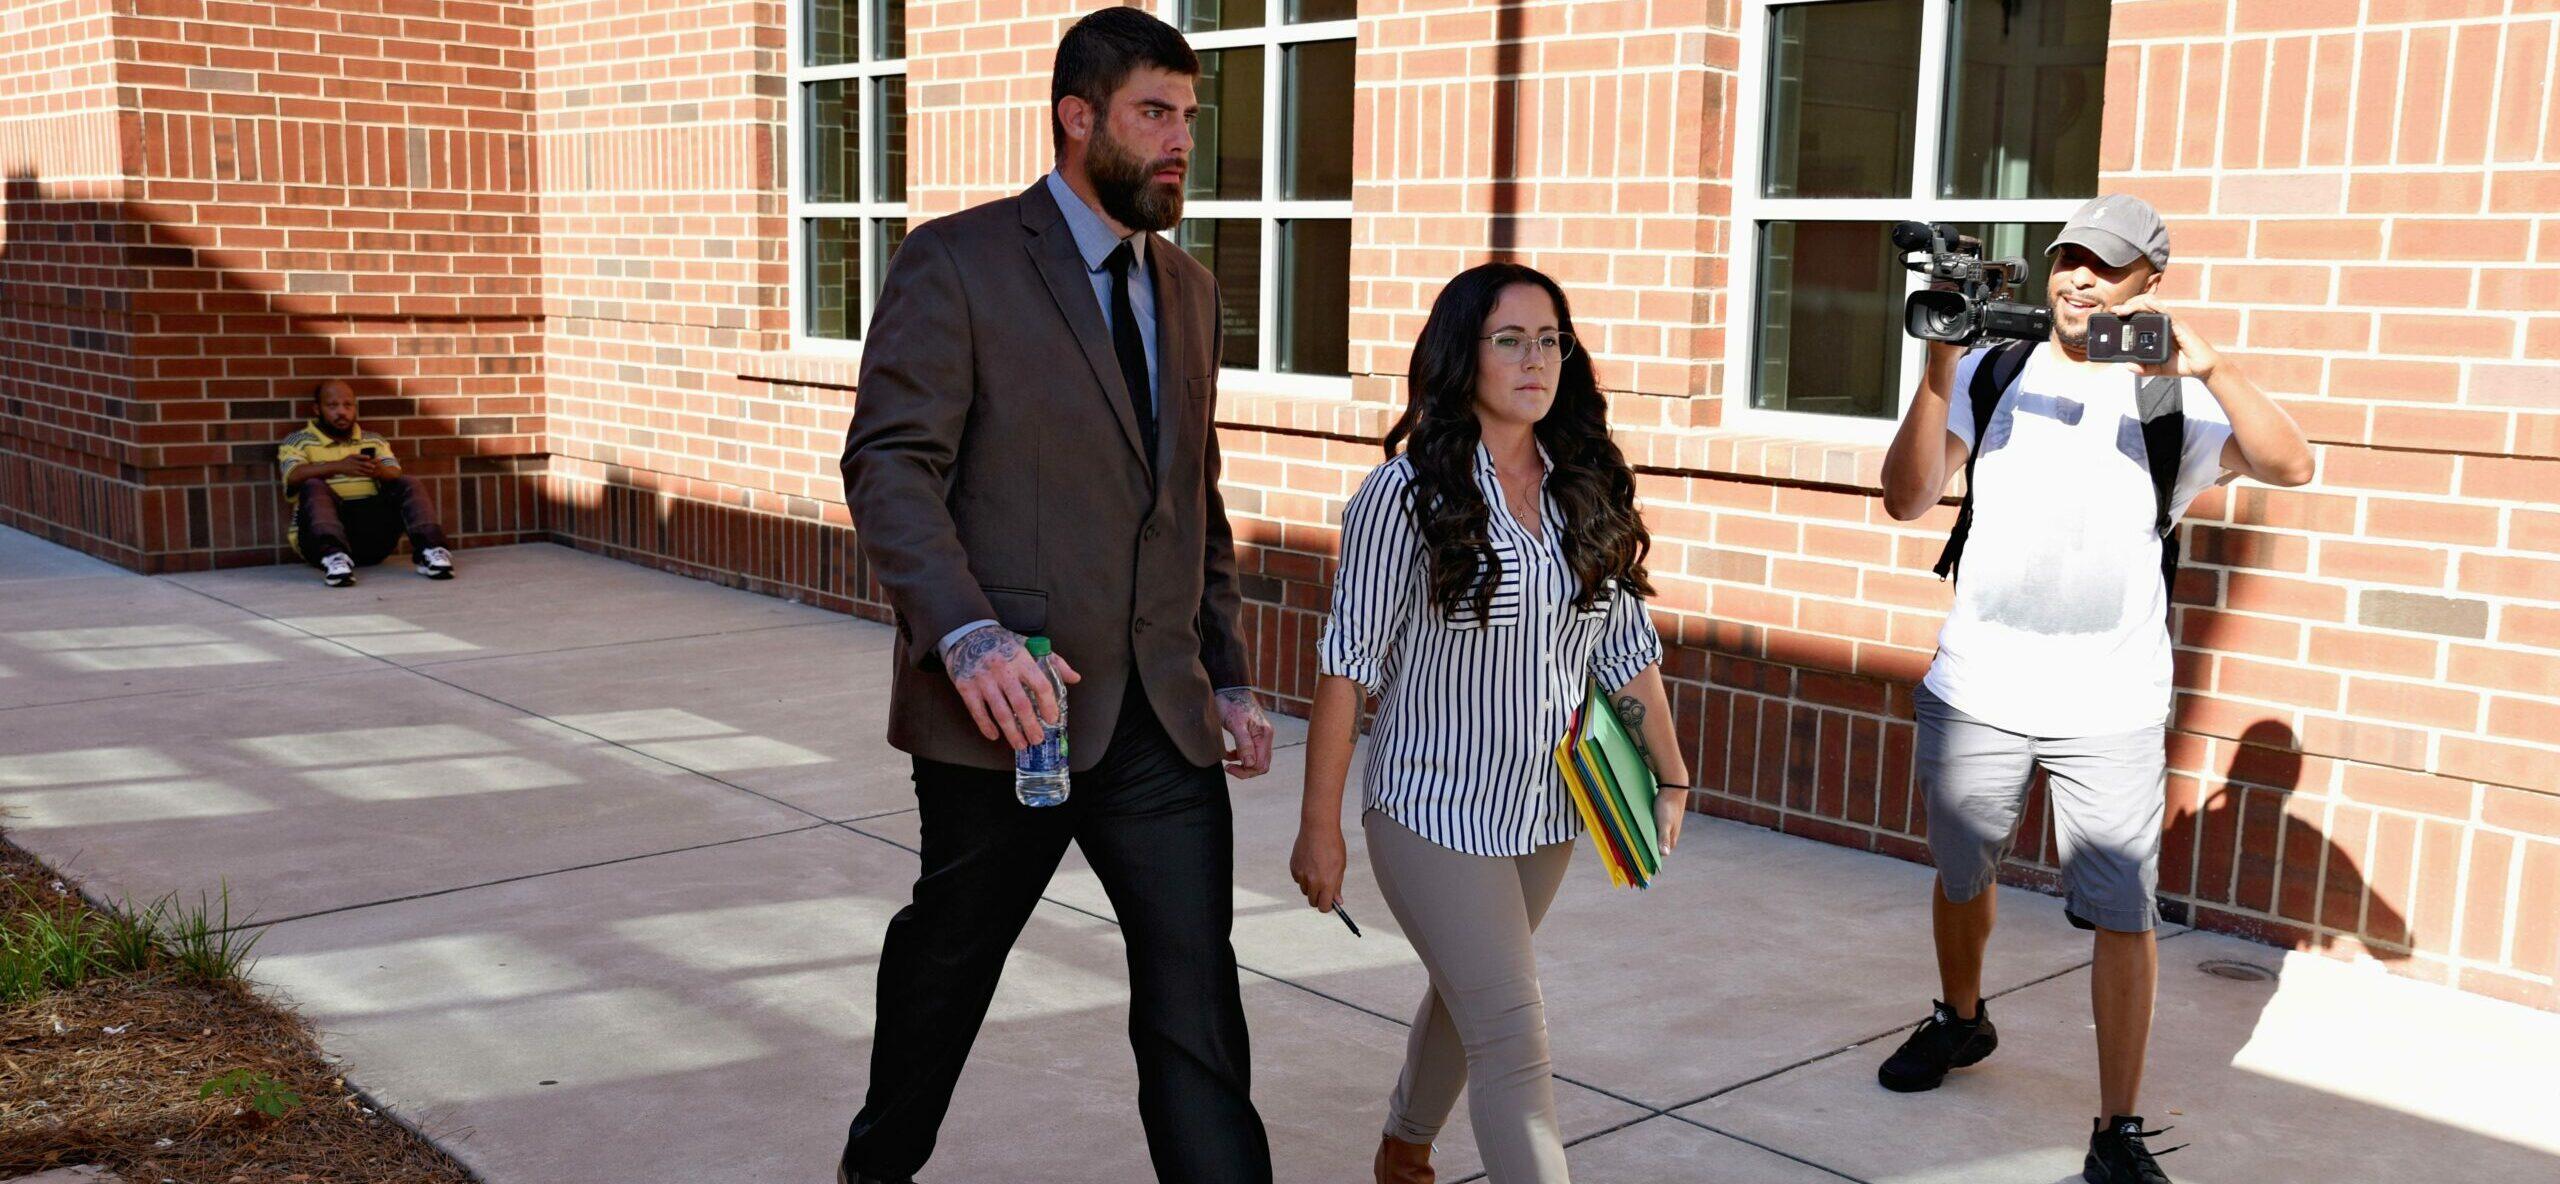 ‘Teen Mom’ Star Jenelle Evans Gives Blow-By-Blow Of Husband’s DUI Arrest